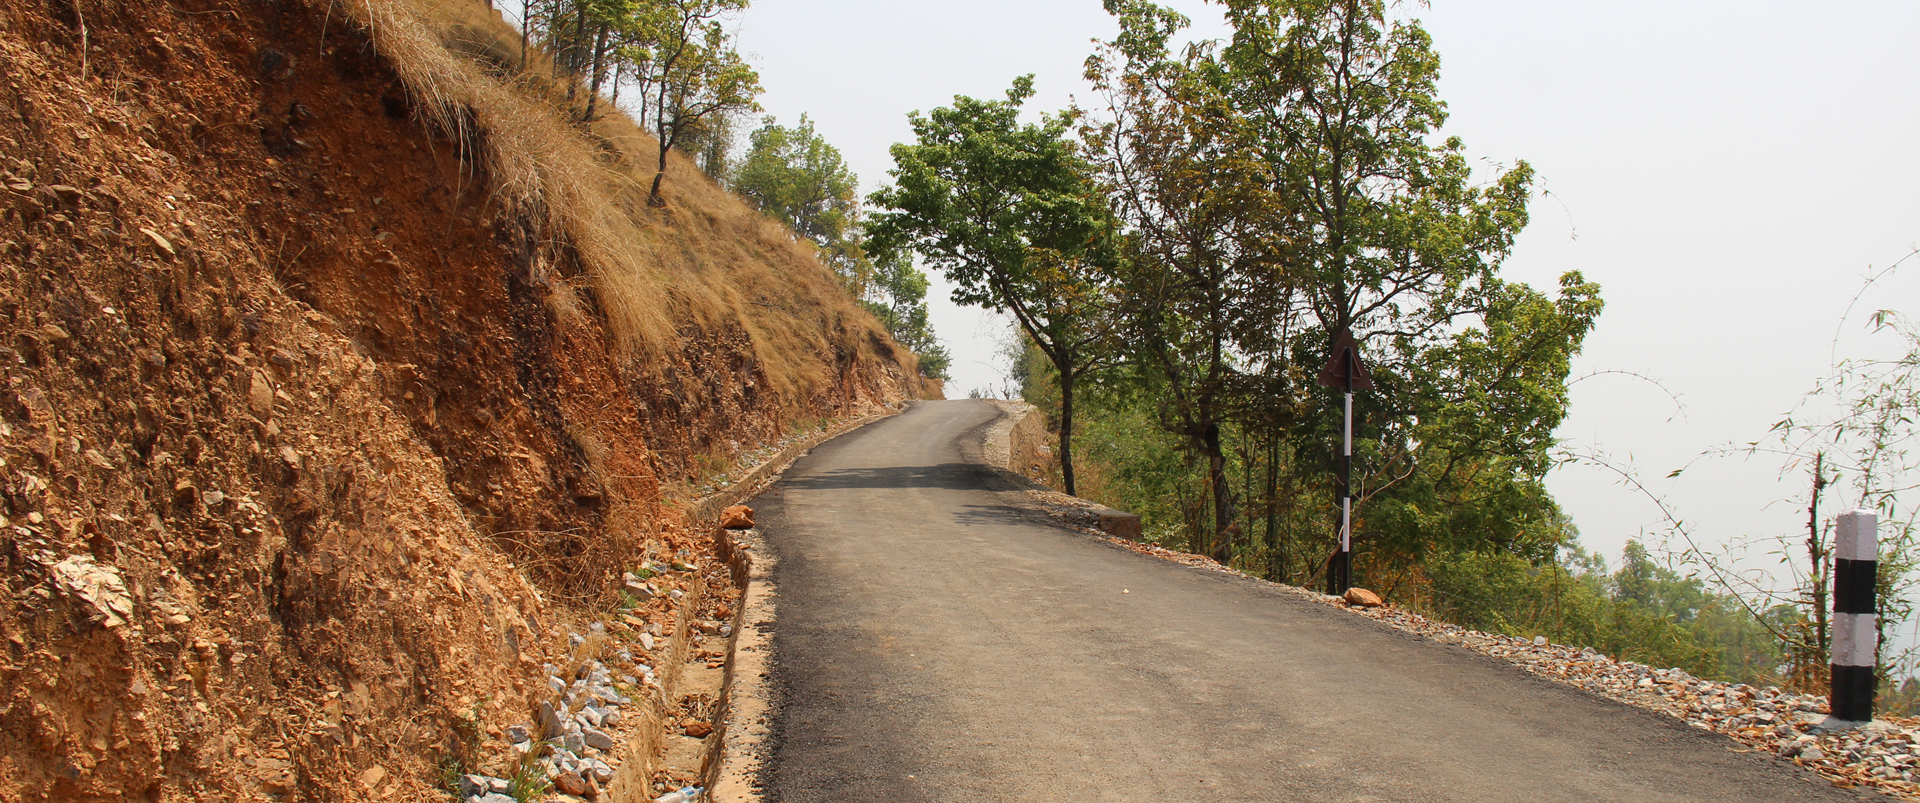 Access Road for Improved Connectivity